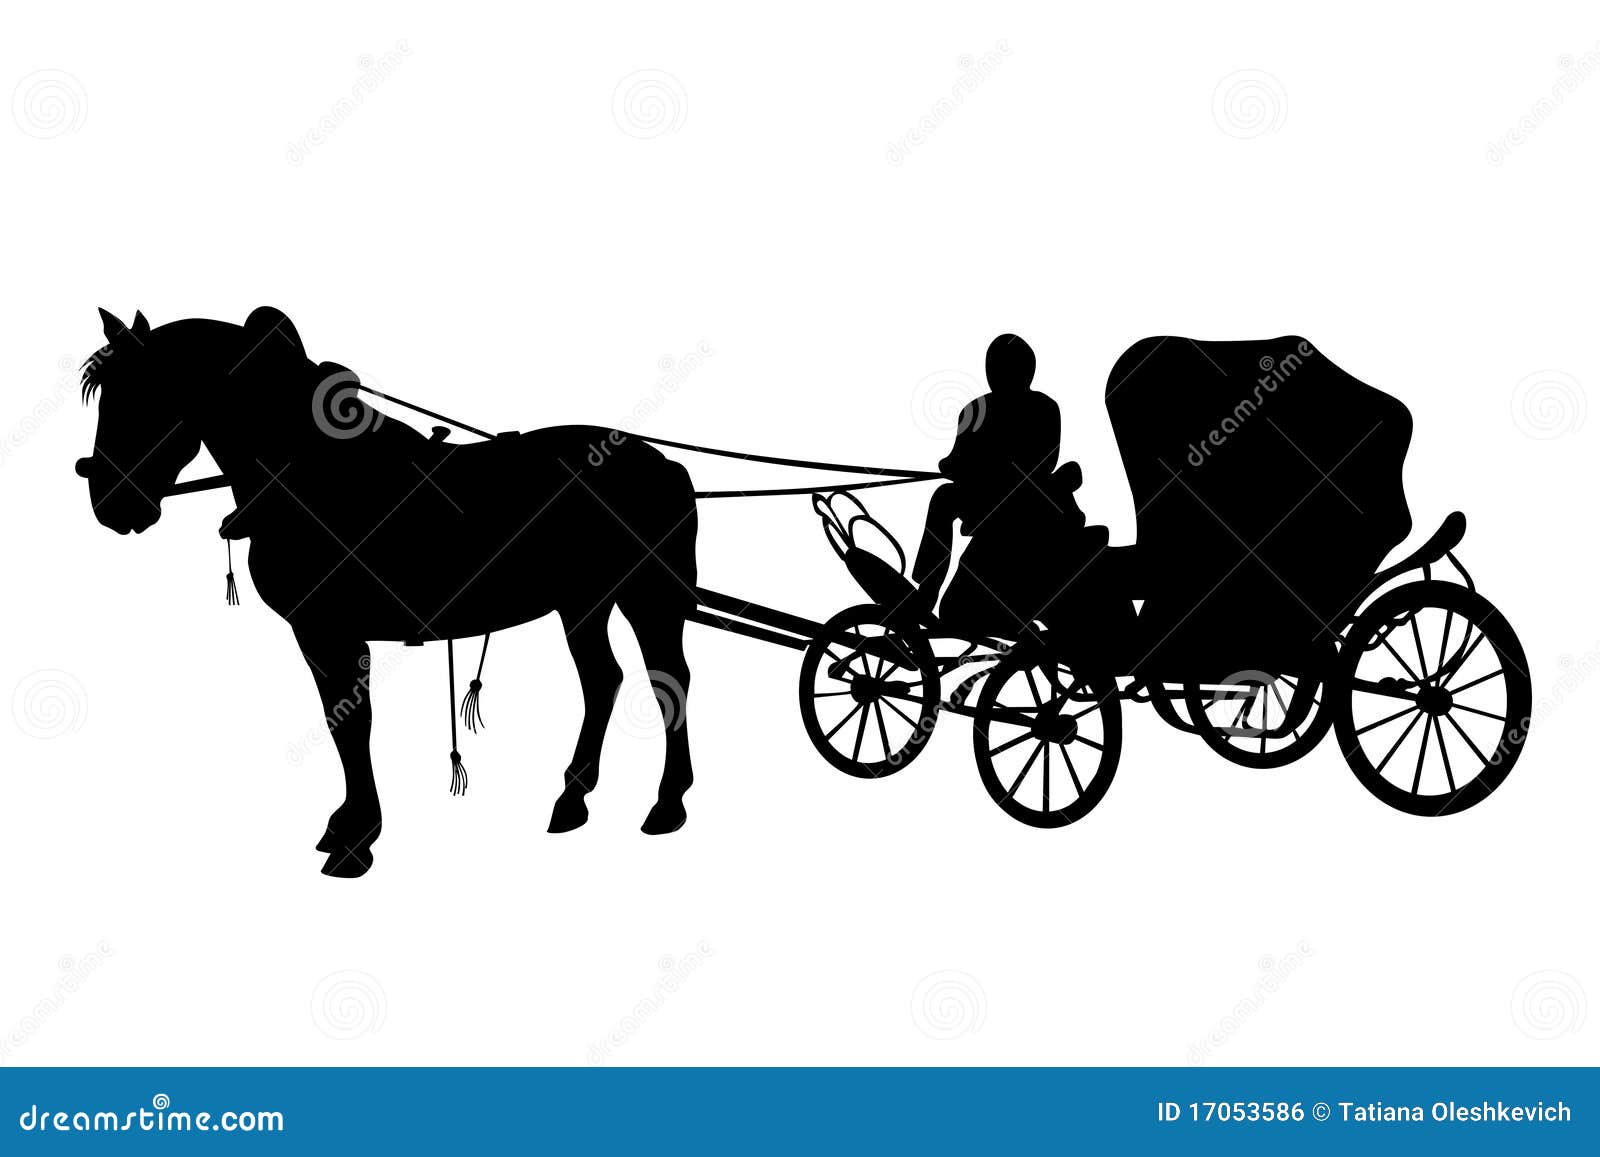 horse and carriage clipart - photo #48